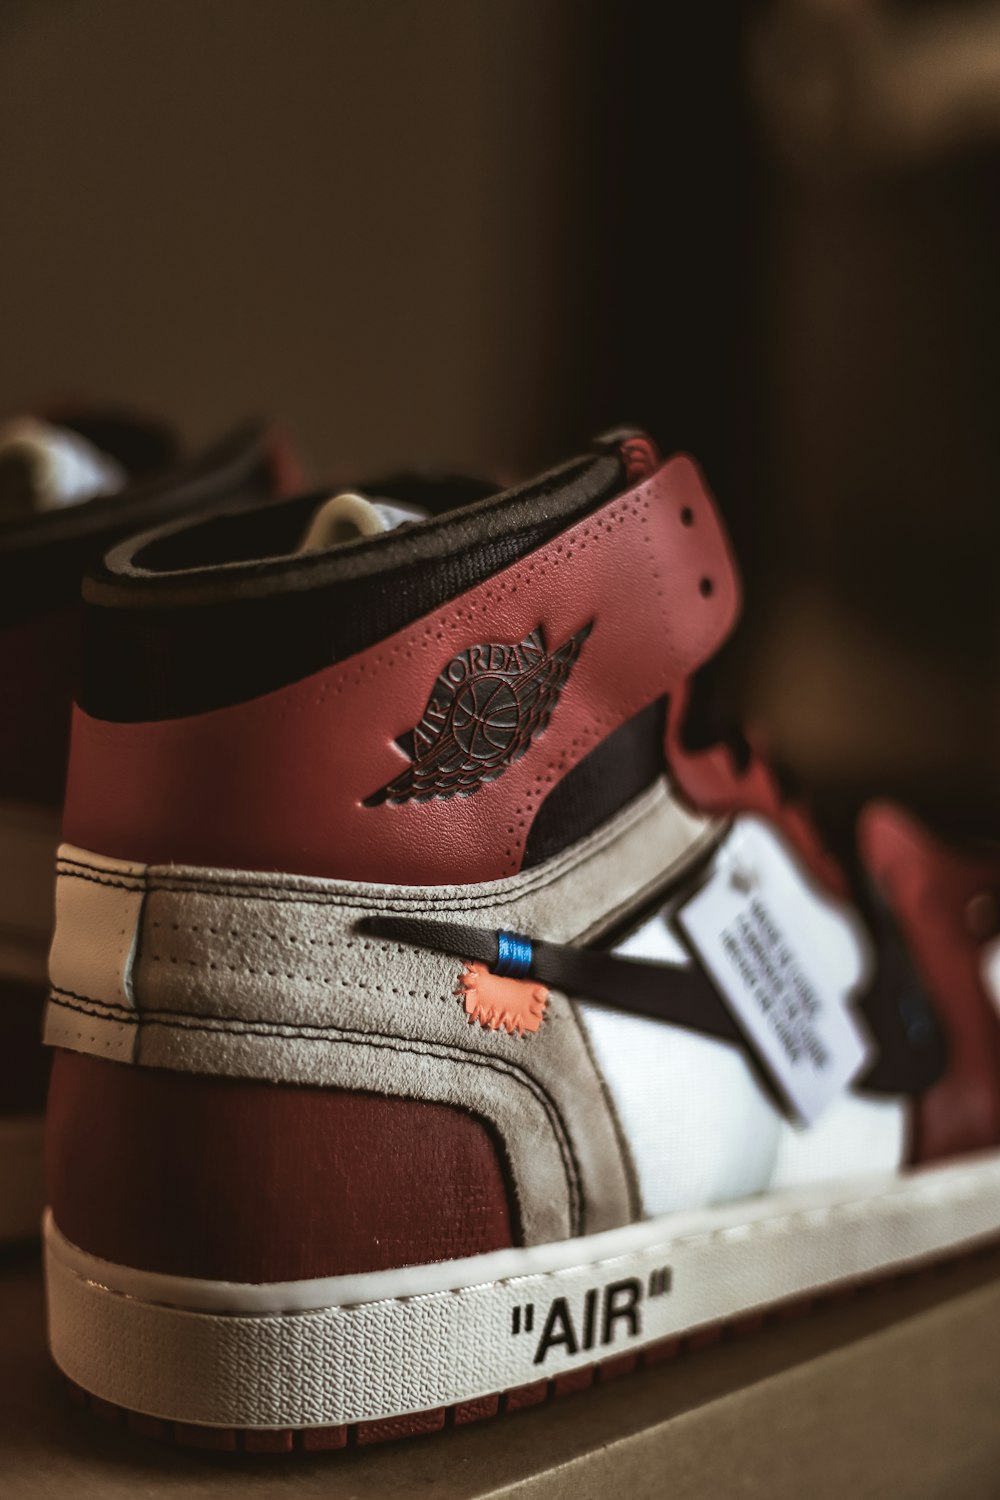 Sneakers Wallpaper Pictures  Download Free Images on Unsplash